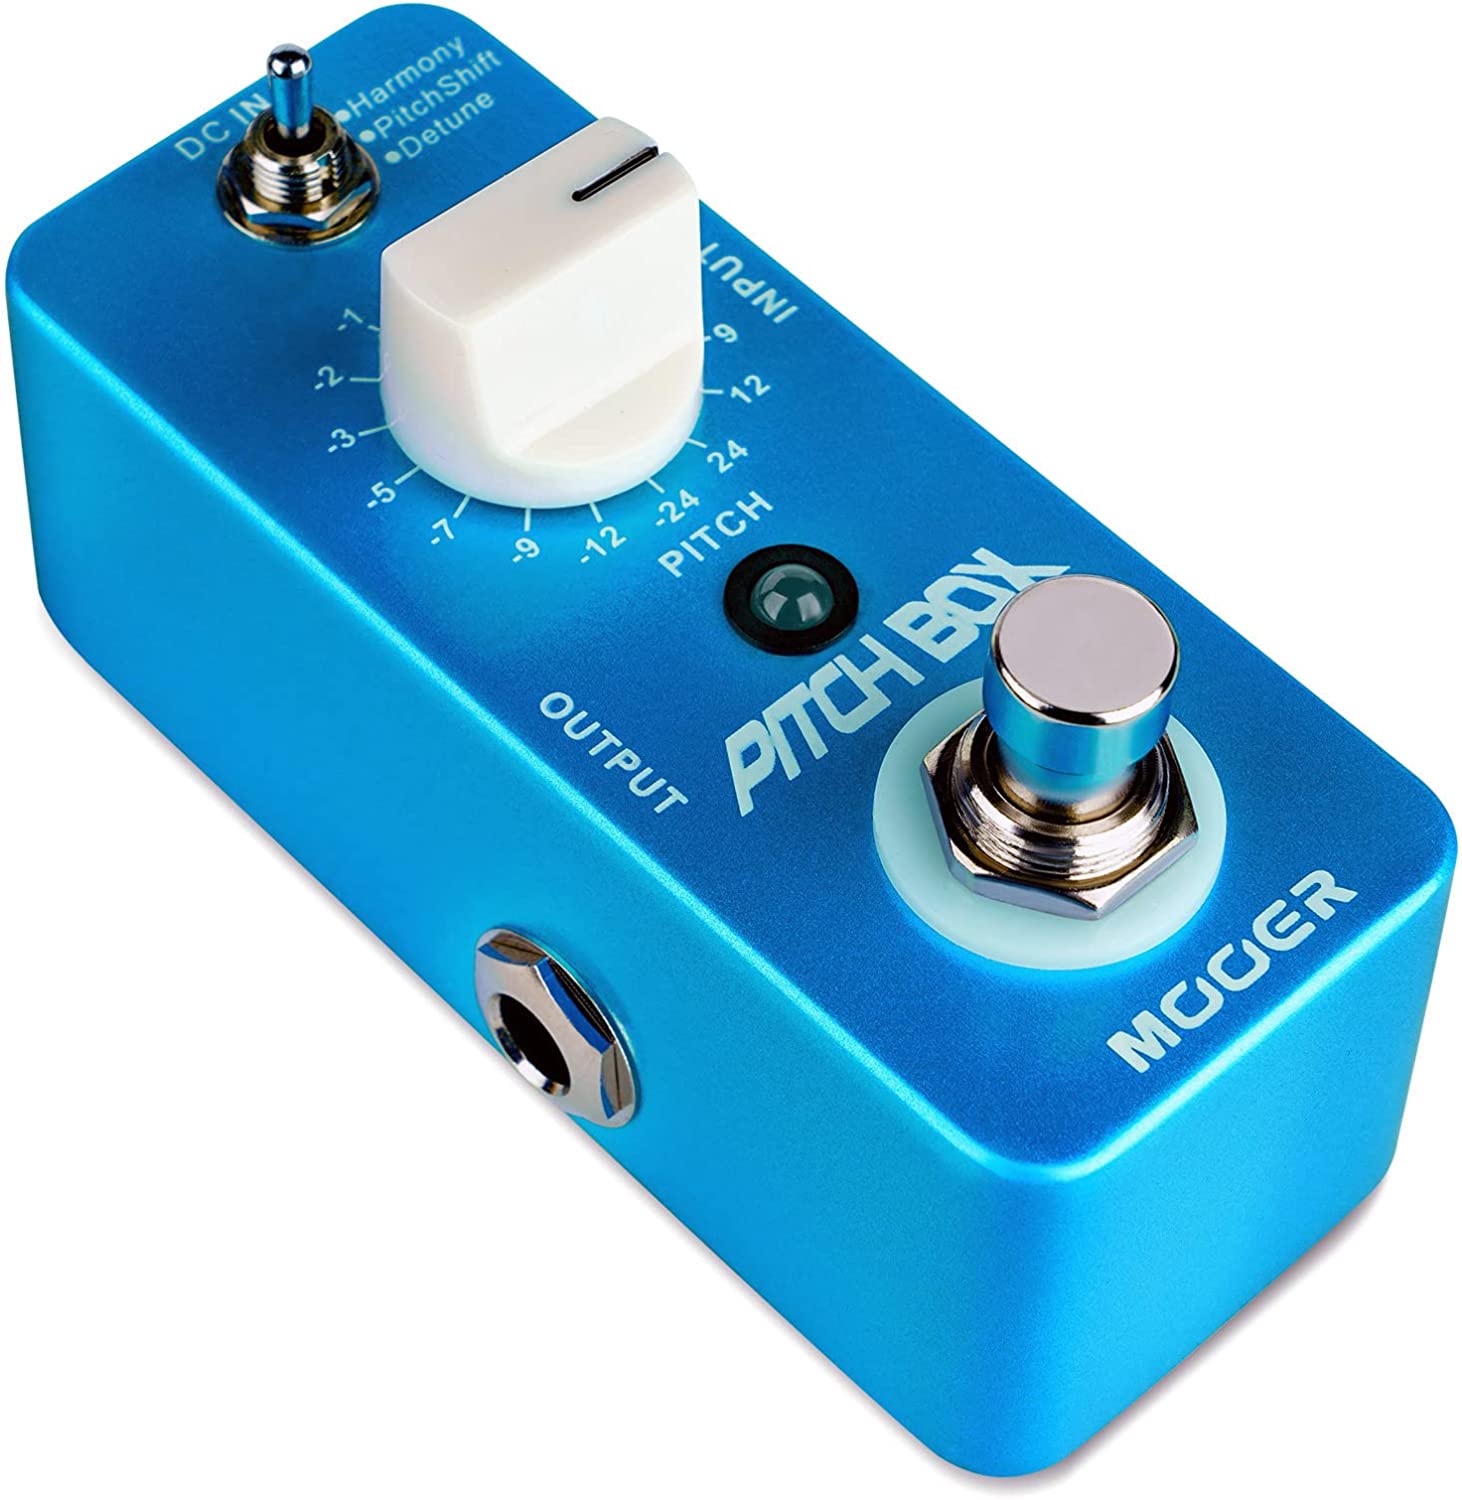 MOOER Pitch Box Guitar Harmonizer Pedal on a white background